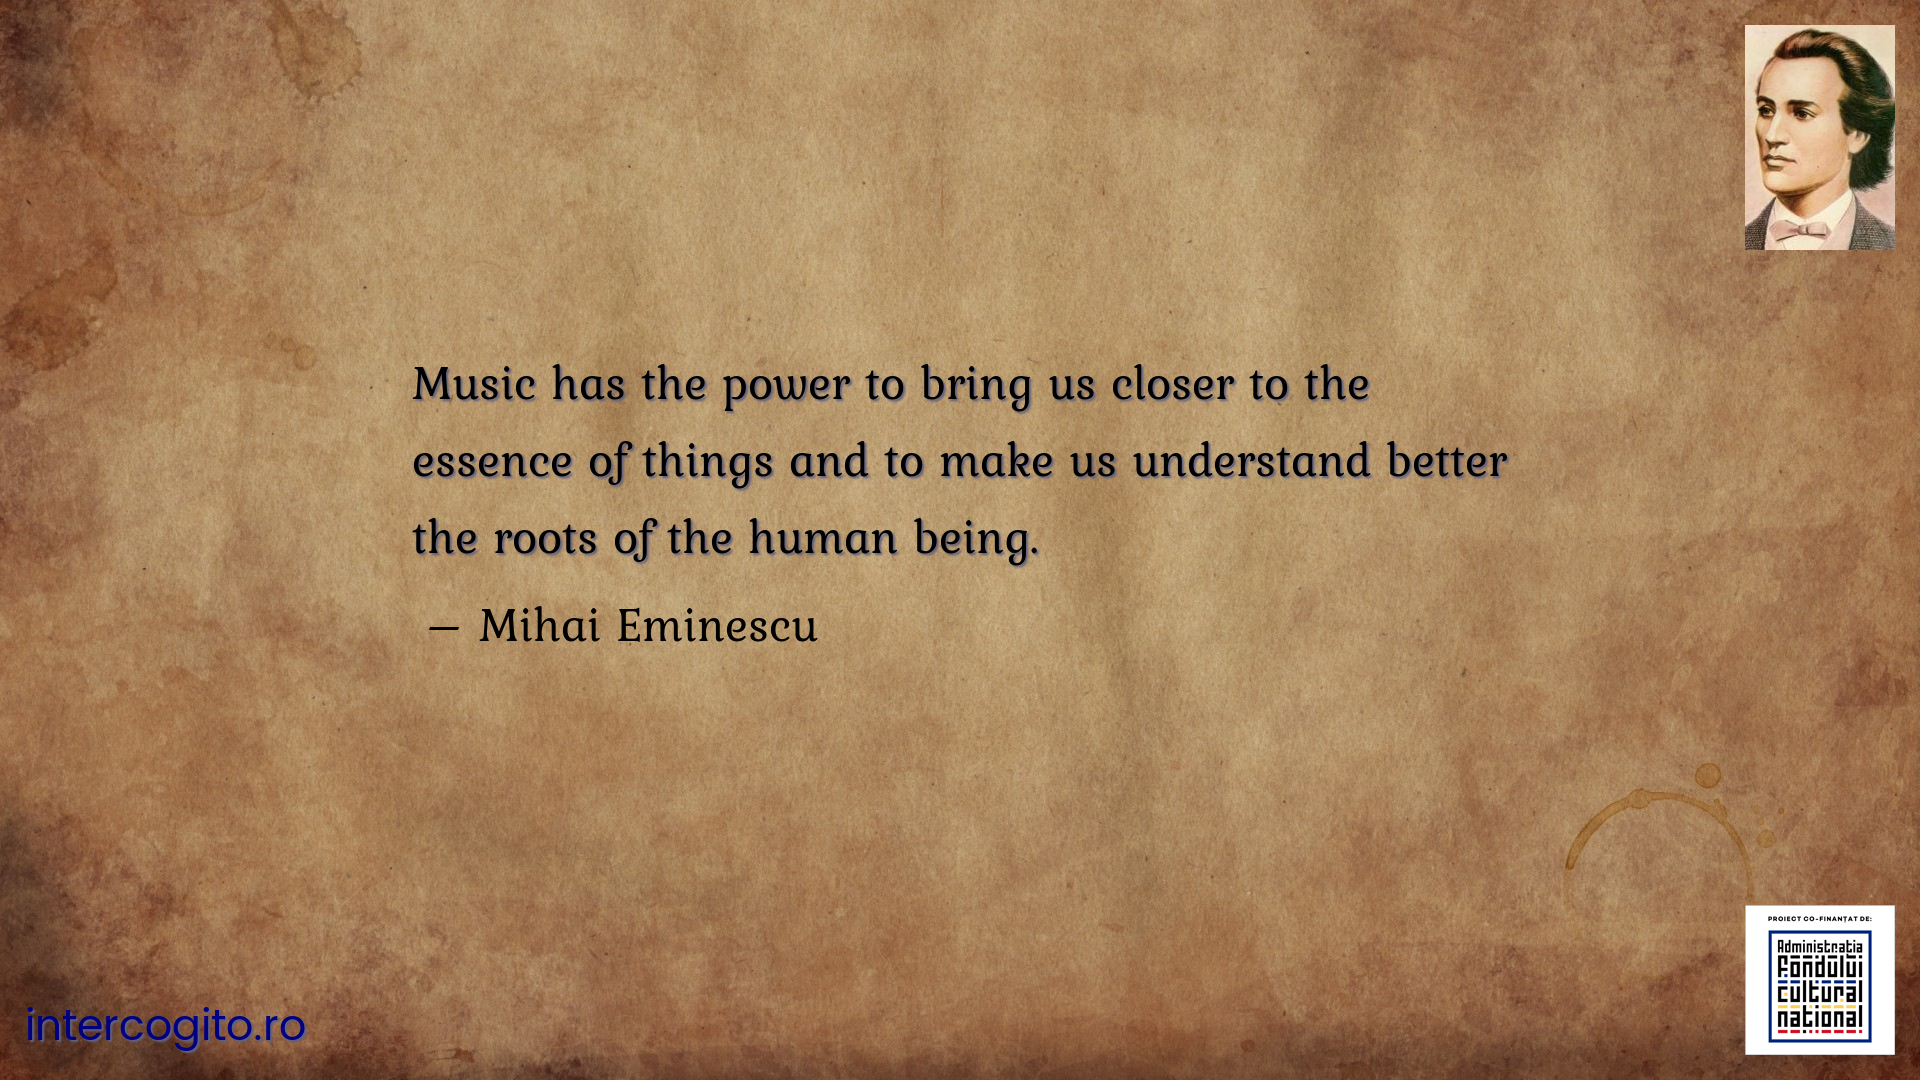 Music has the power to bring us closer to the essence of things and to make us understand better the roots of the human being.